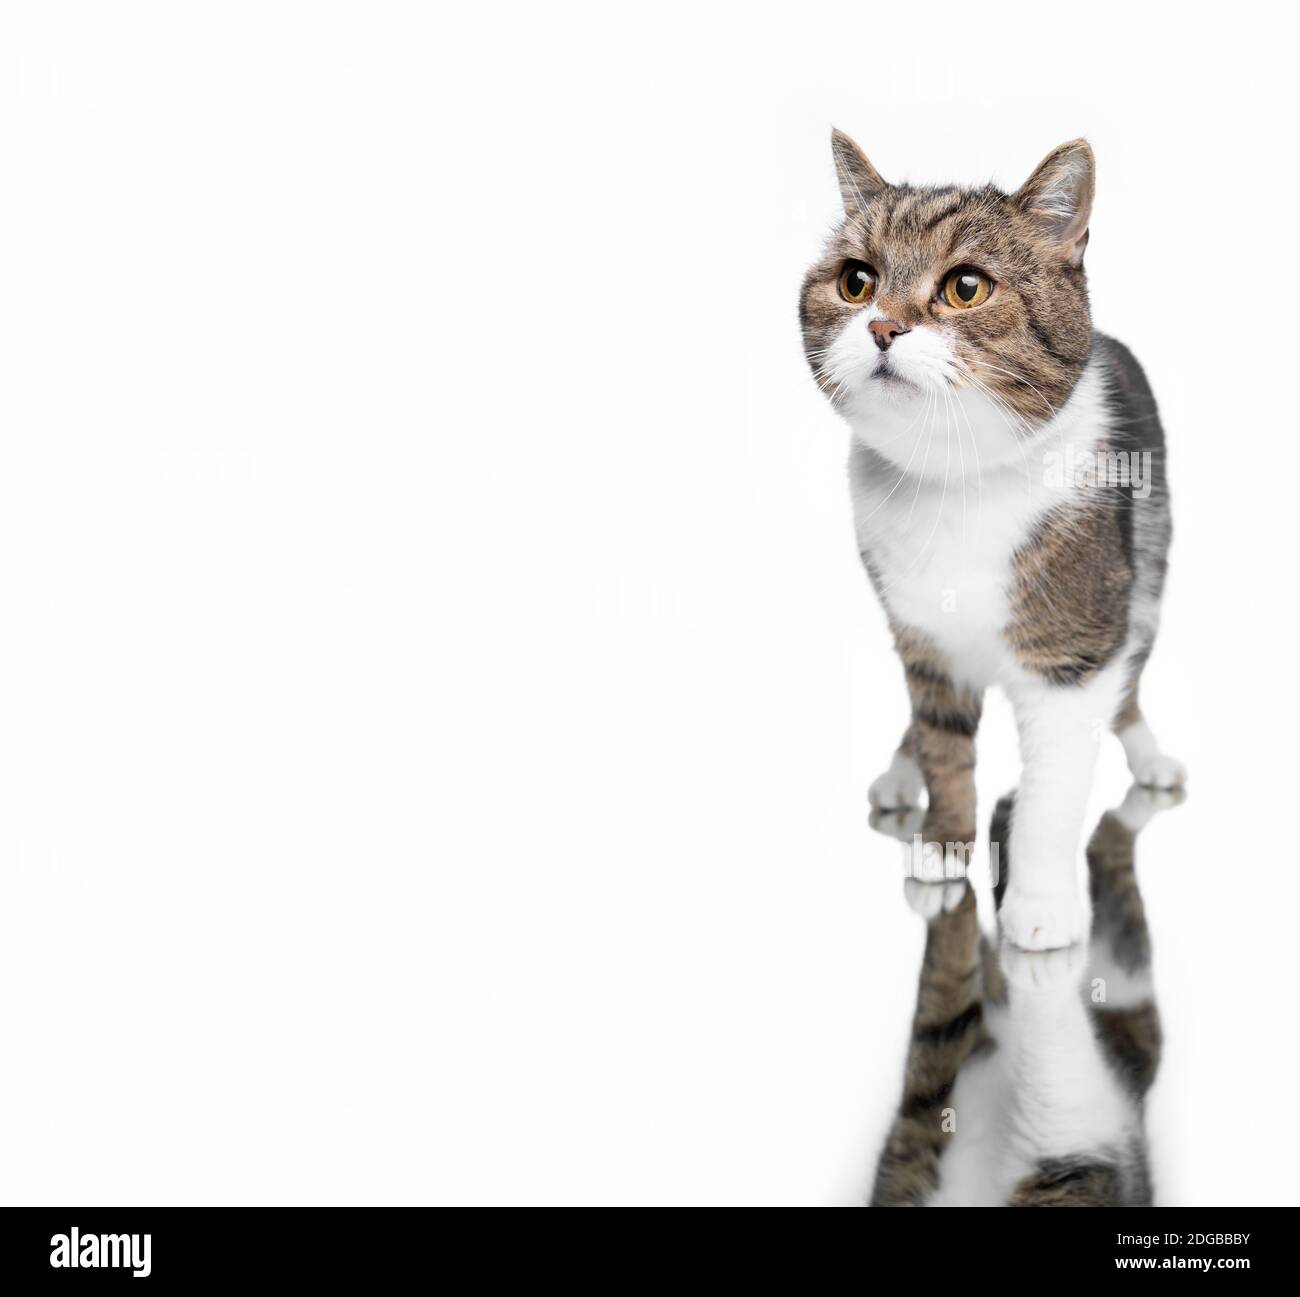 beautiful tabby white british shorthair cat standing on mirror in front of white studio background with copy space looking curiously Stock Photo